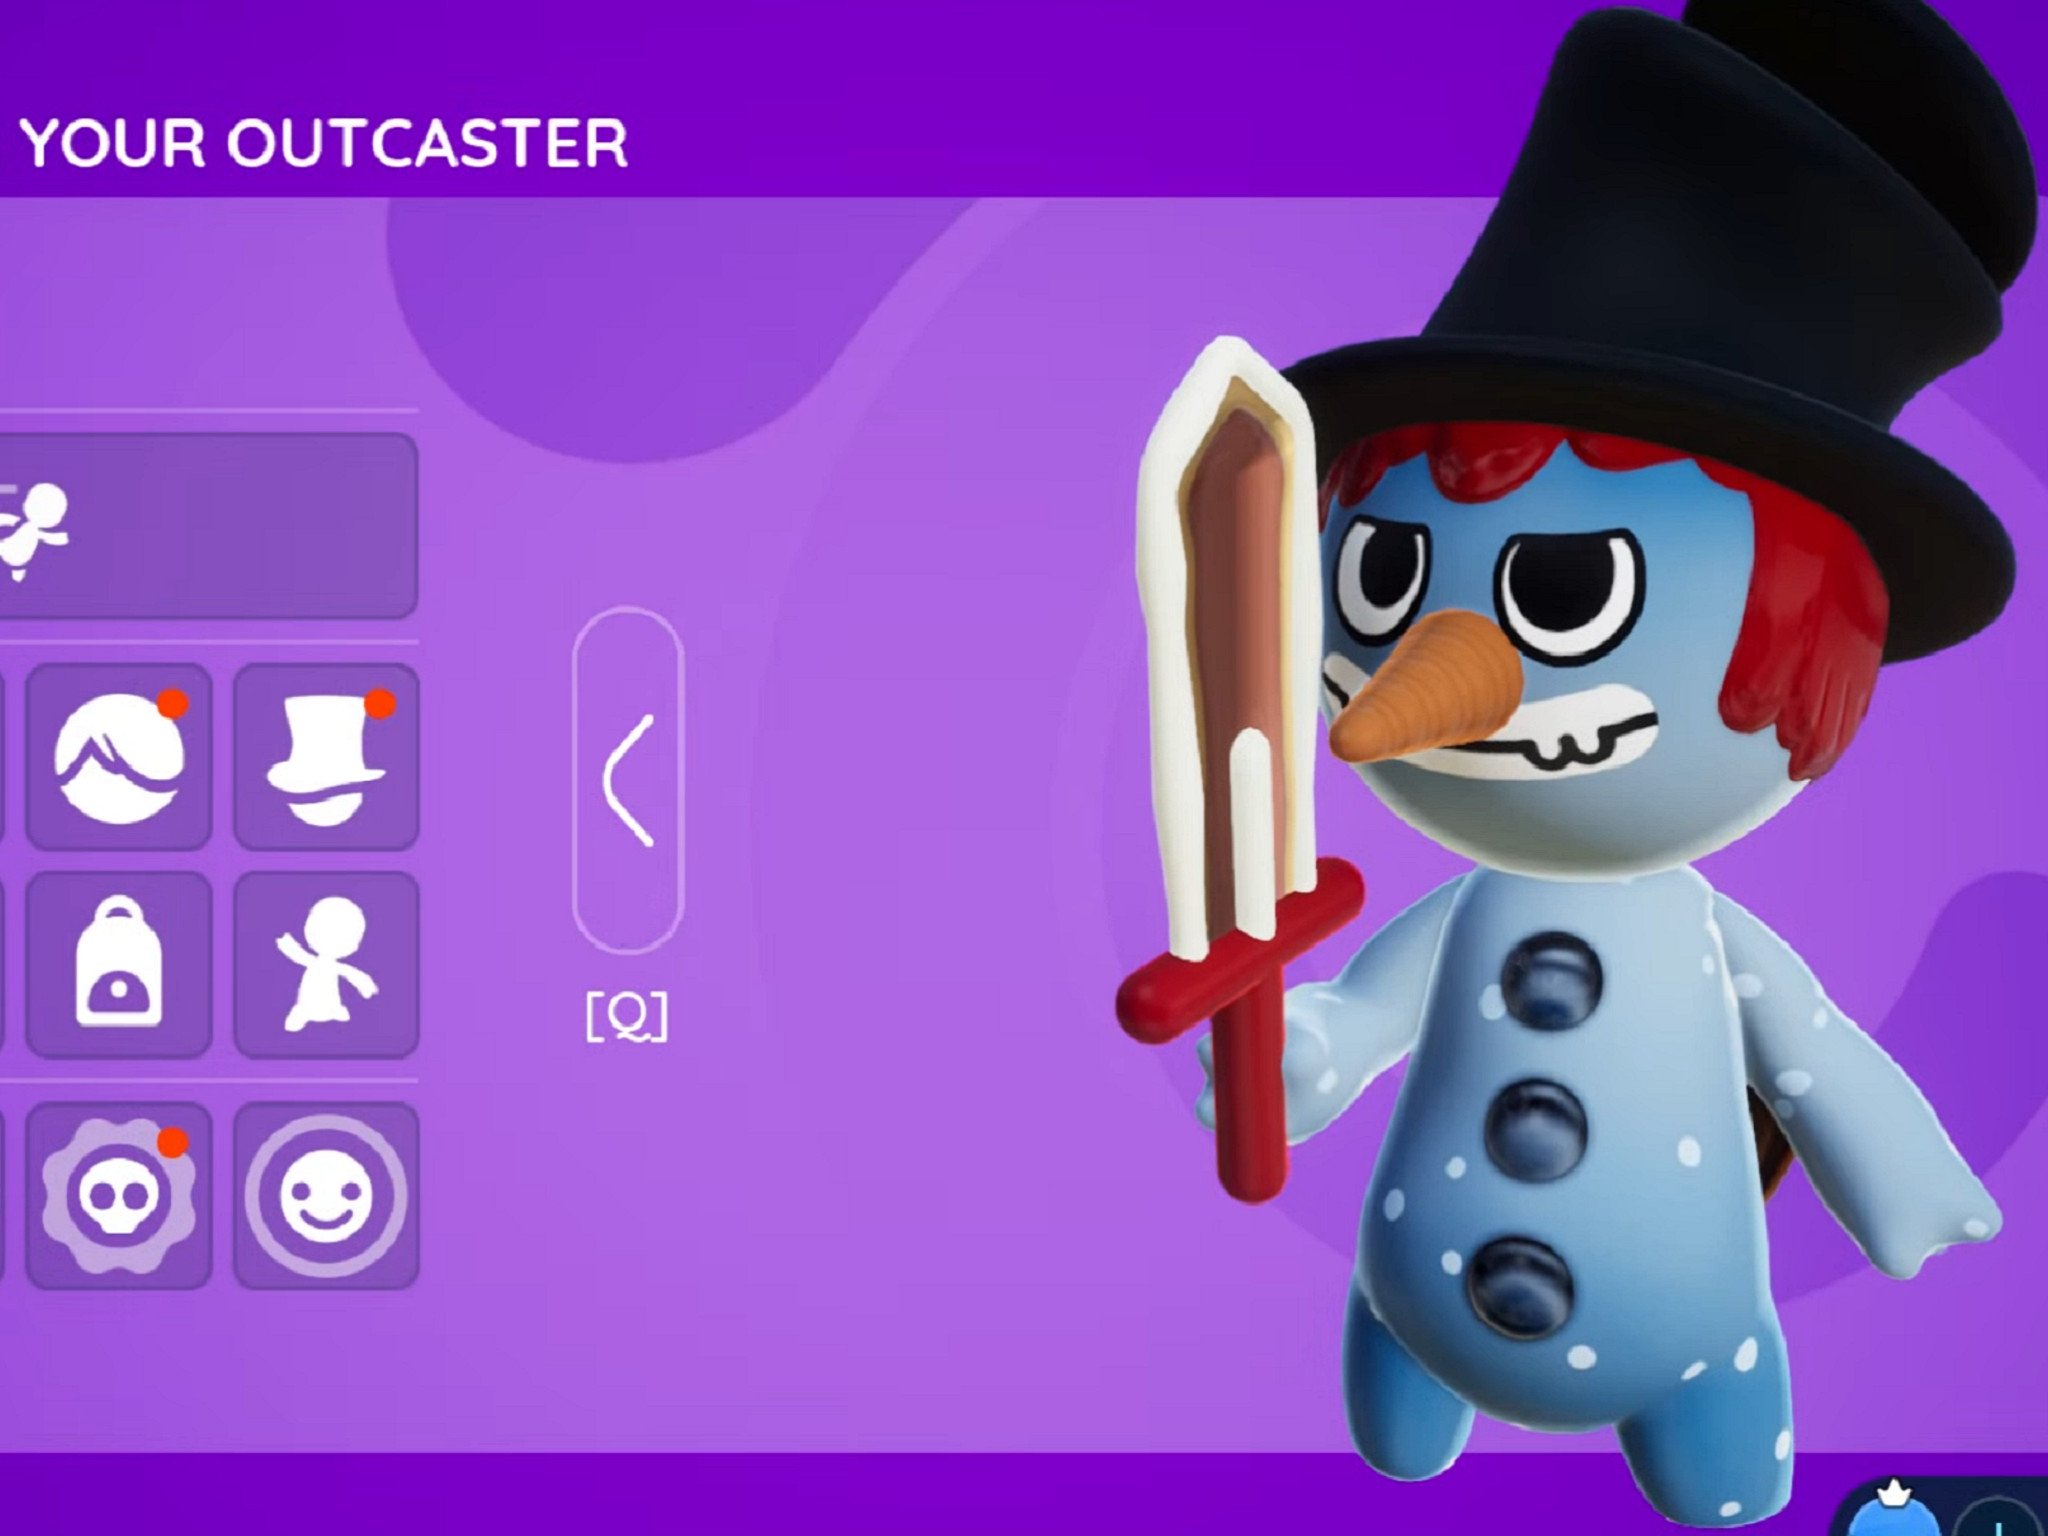 Outcasters Stadia character customization